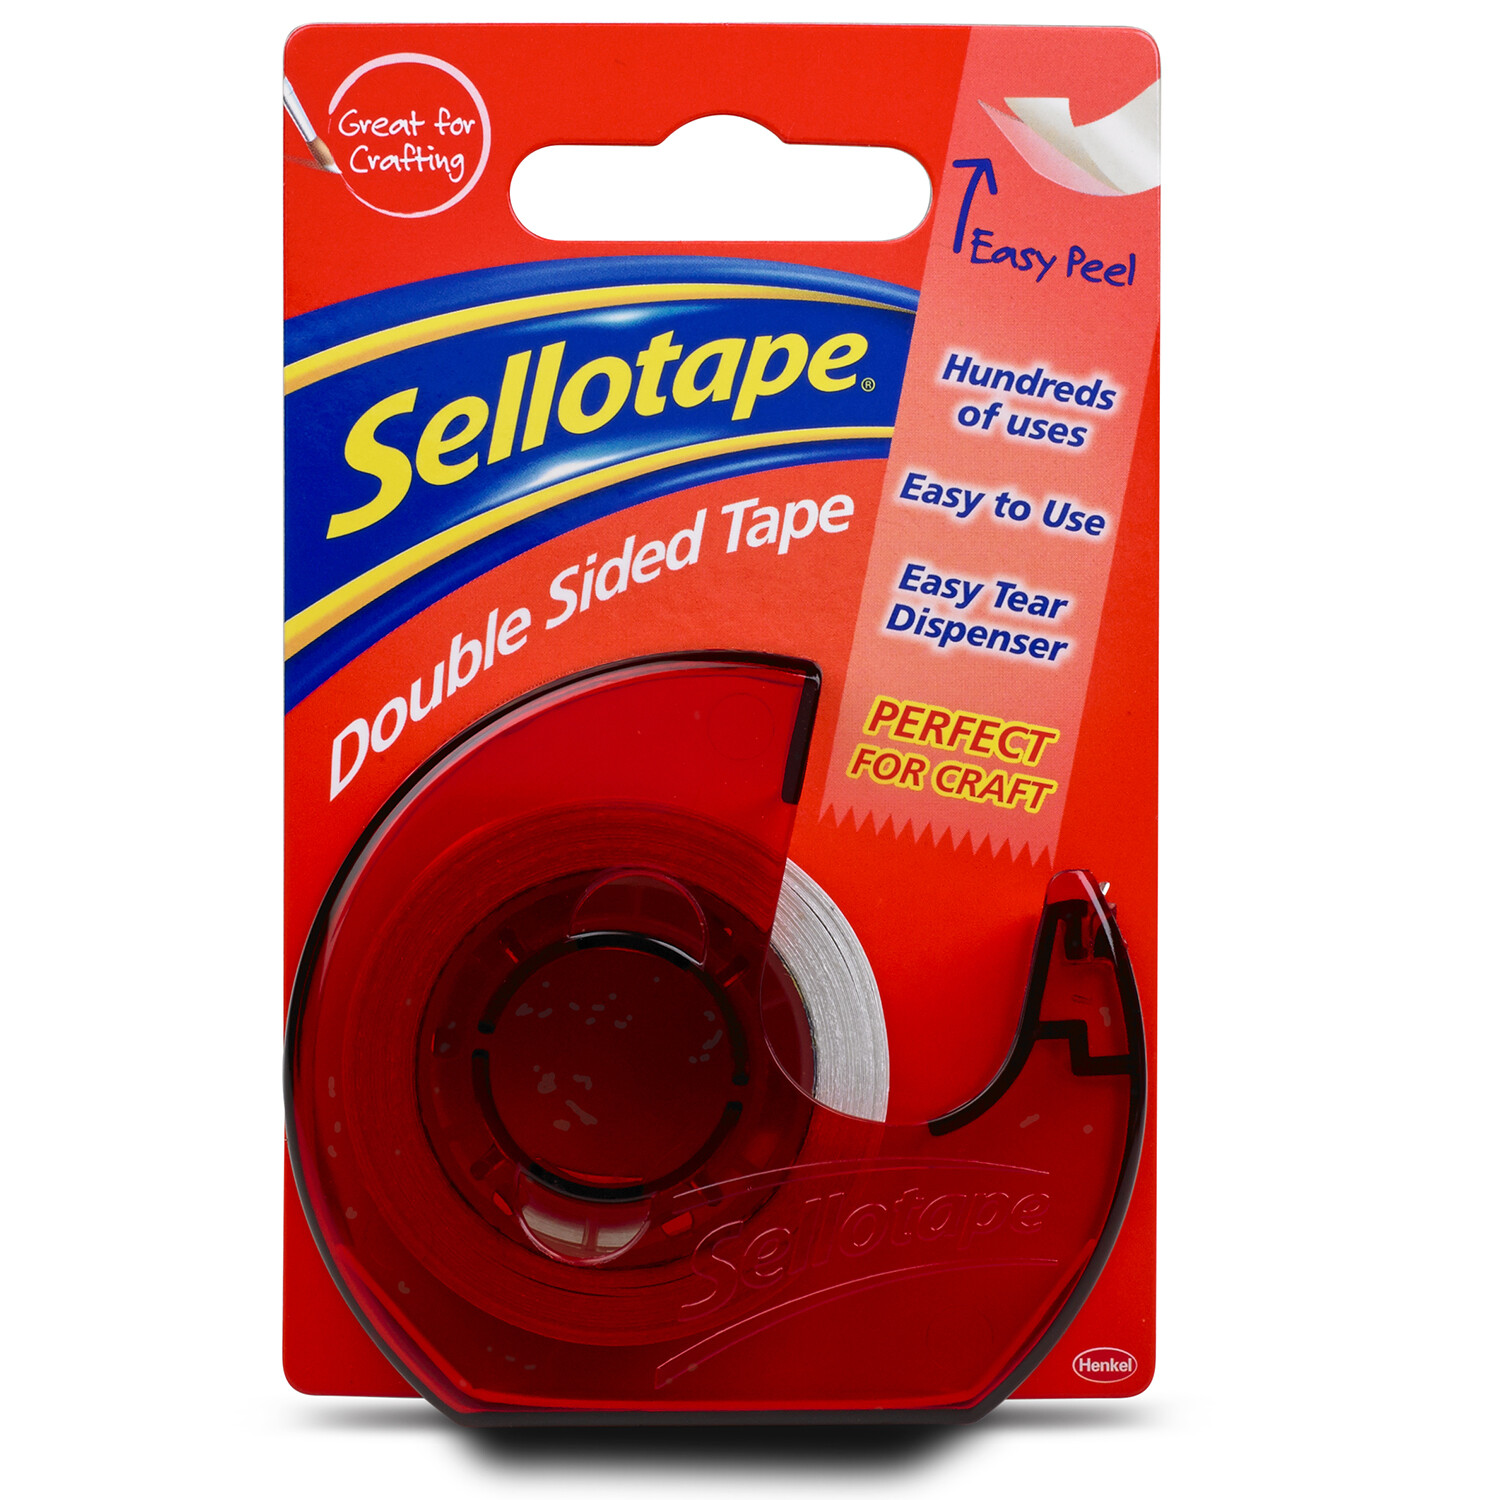 Sellotape Double Sided Tape with Dispenser Image